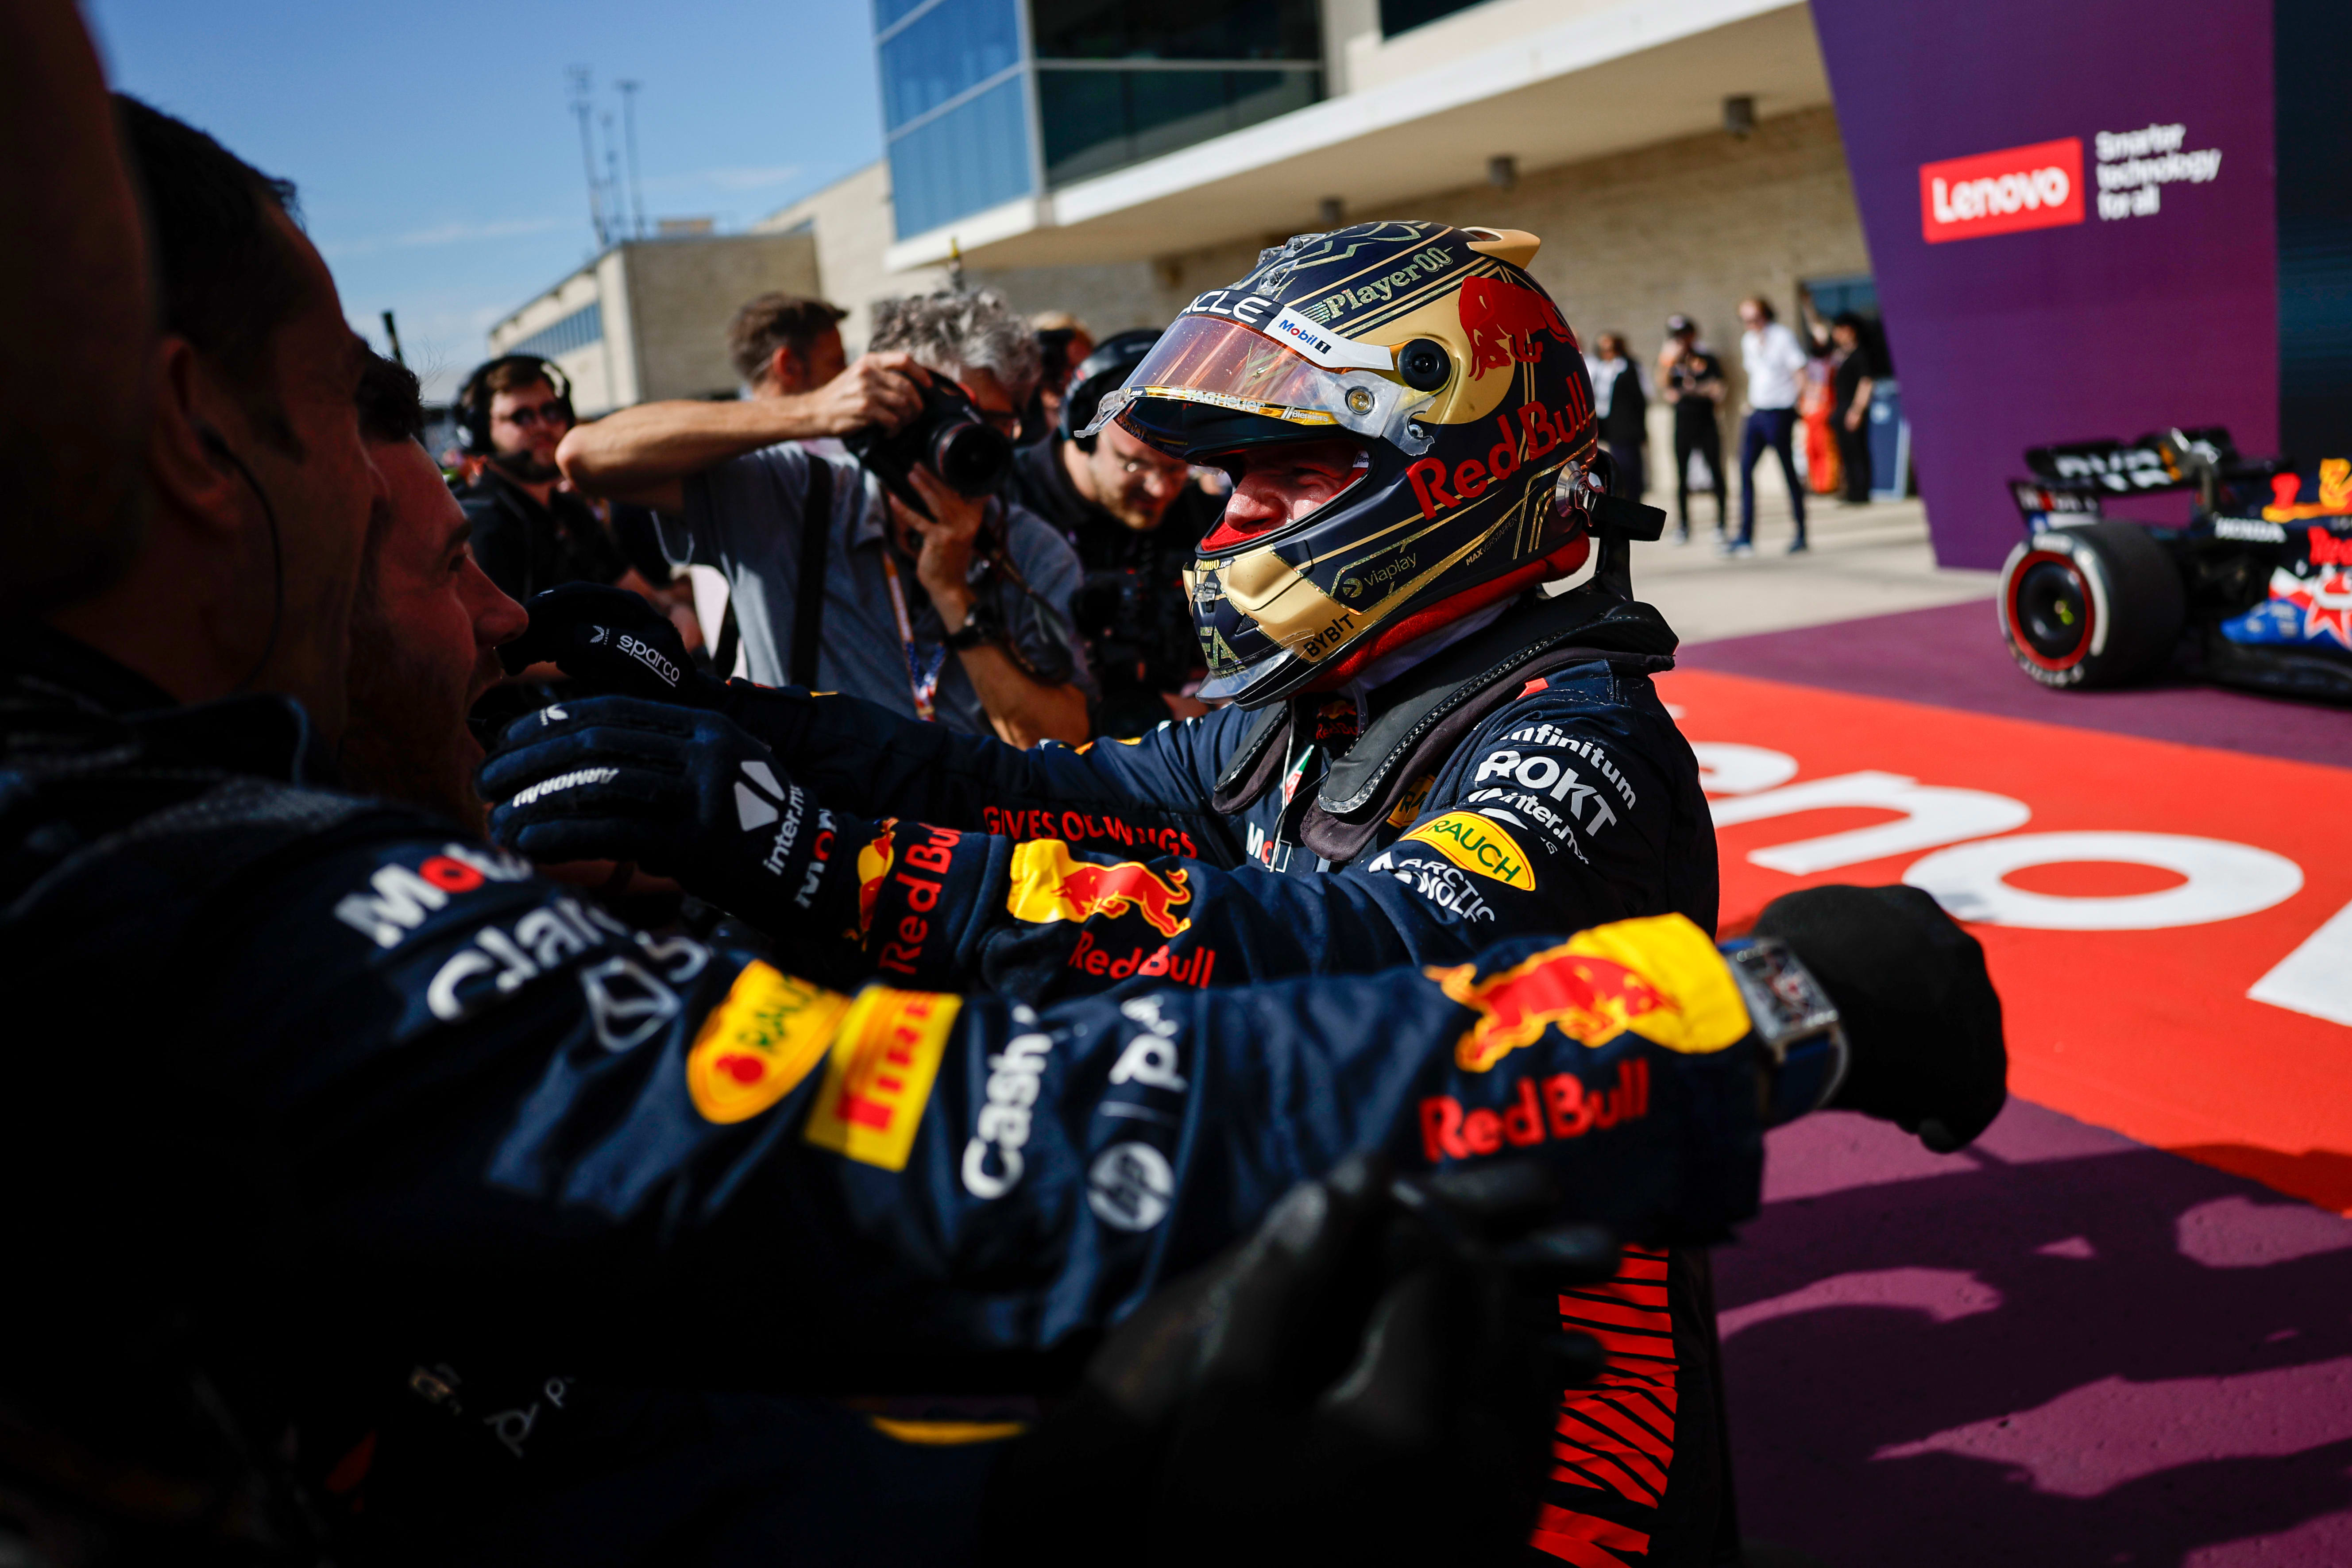 Verstappen wins 50th career F1 victory at the US Grand Prix